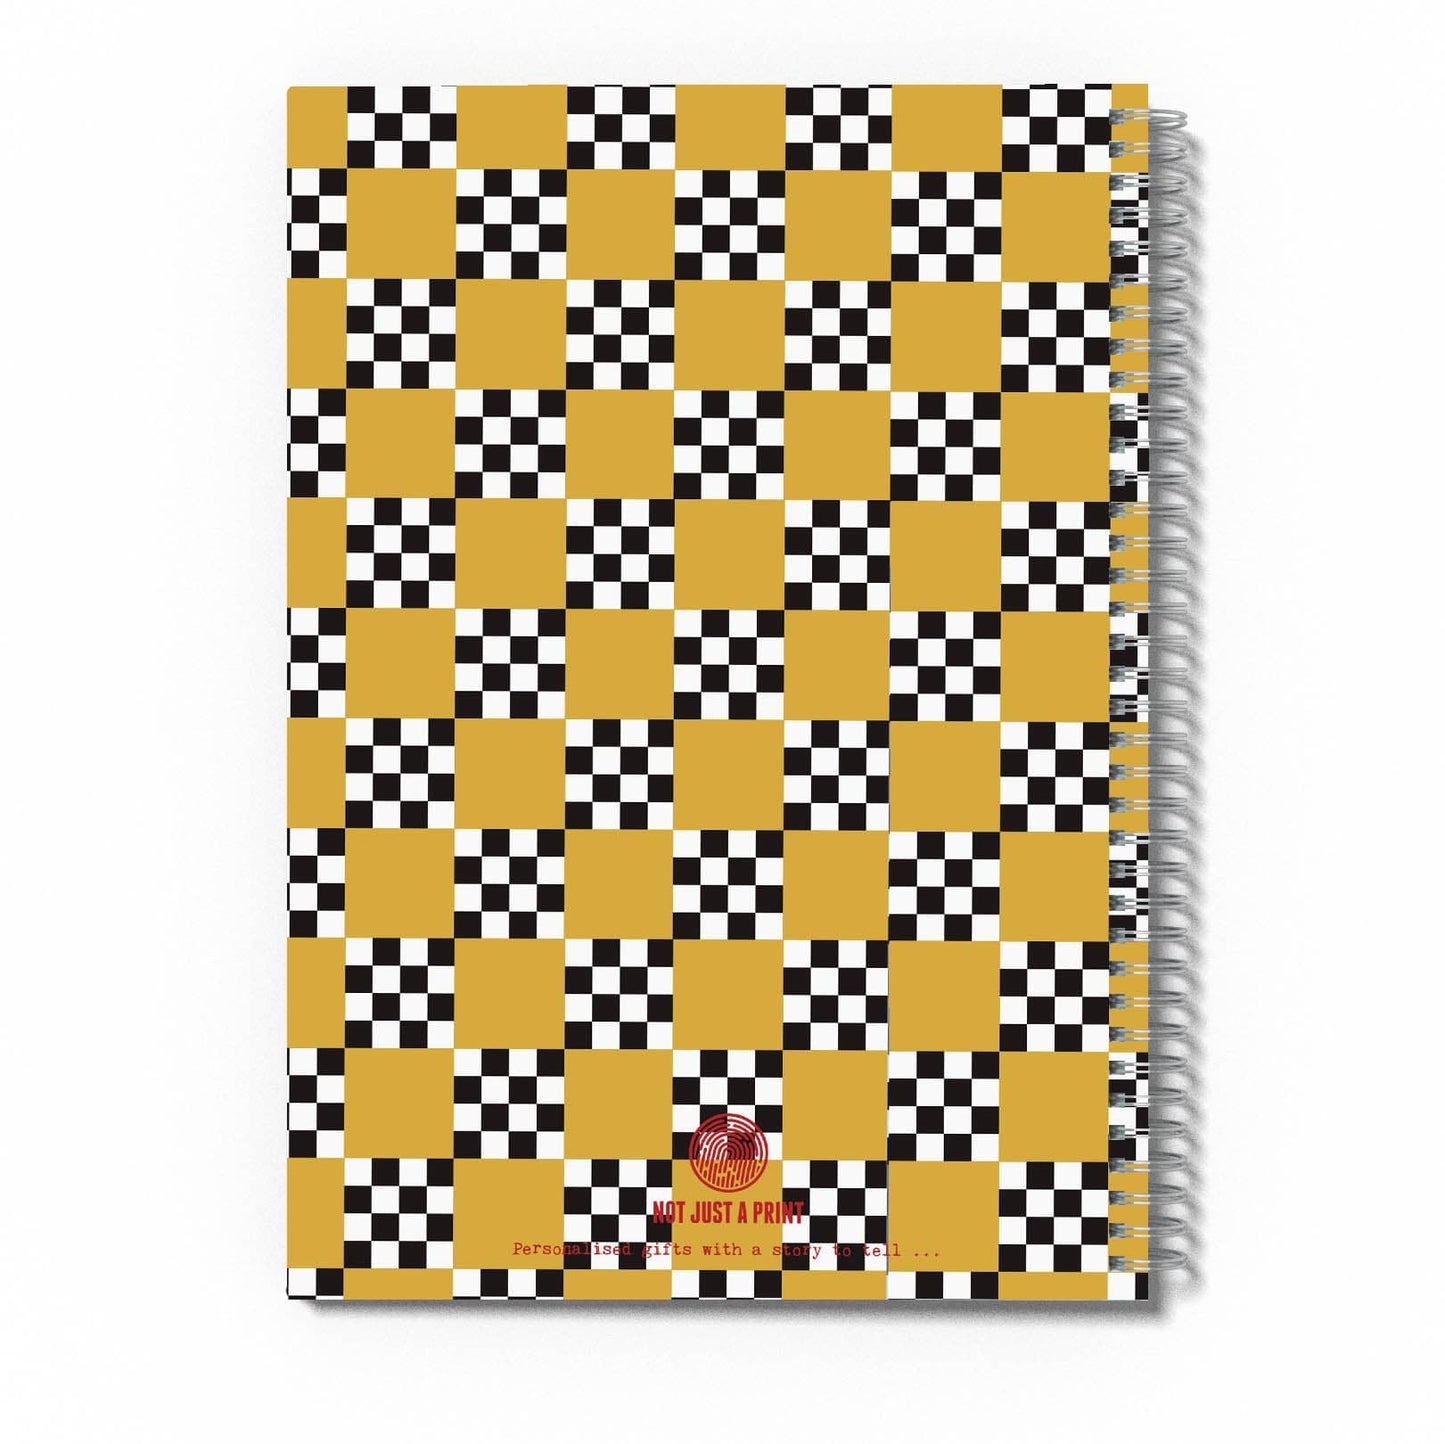 Personalised 90s Check Print A5 Spiral Bound Notebook